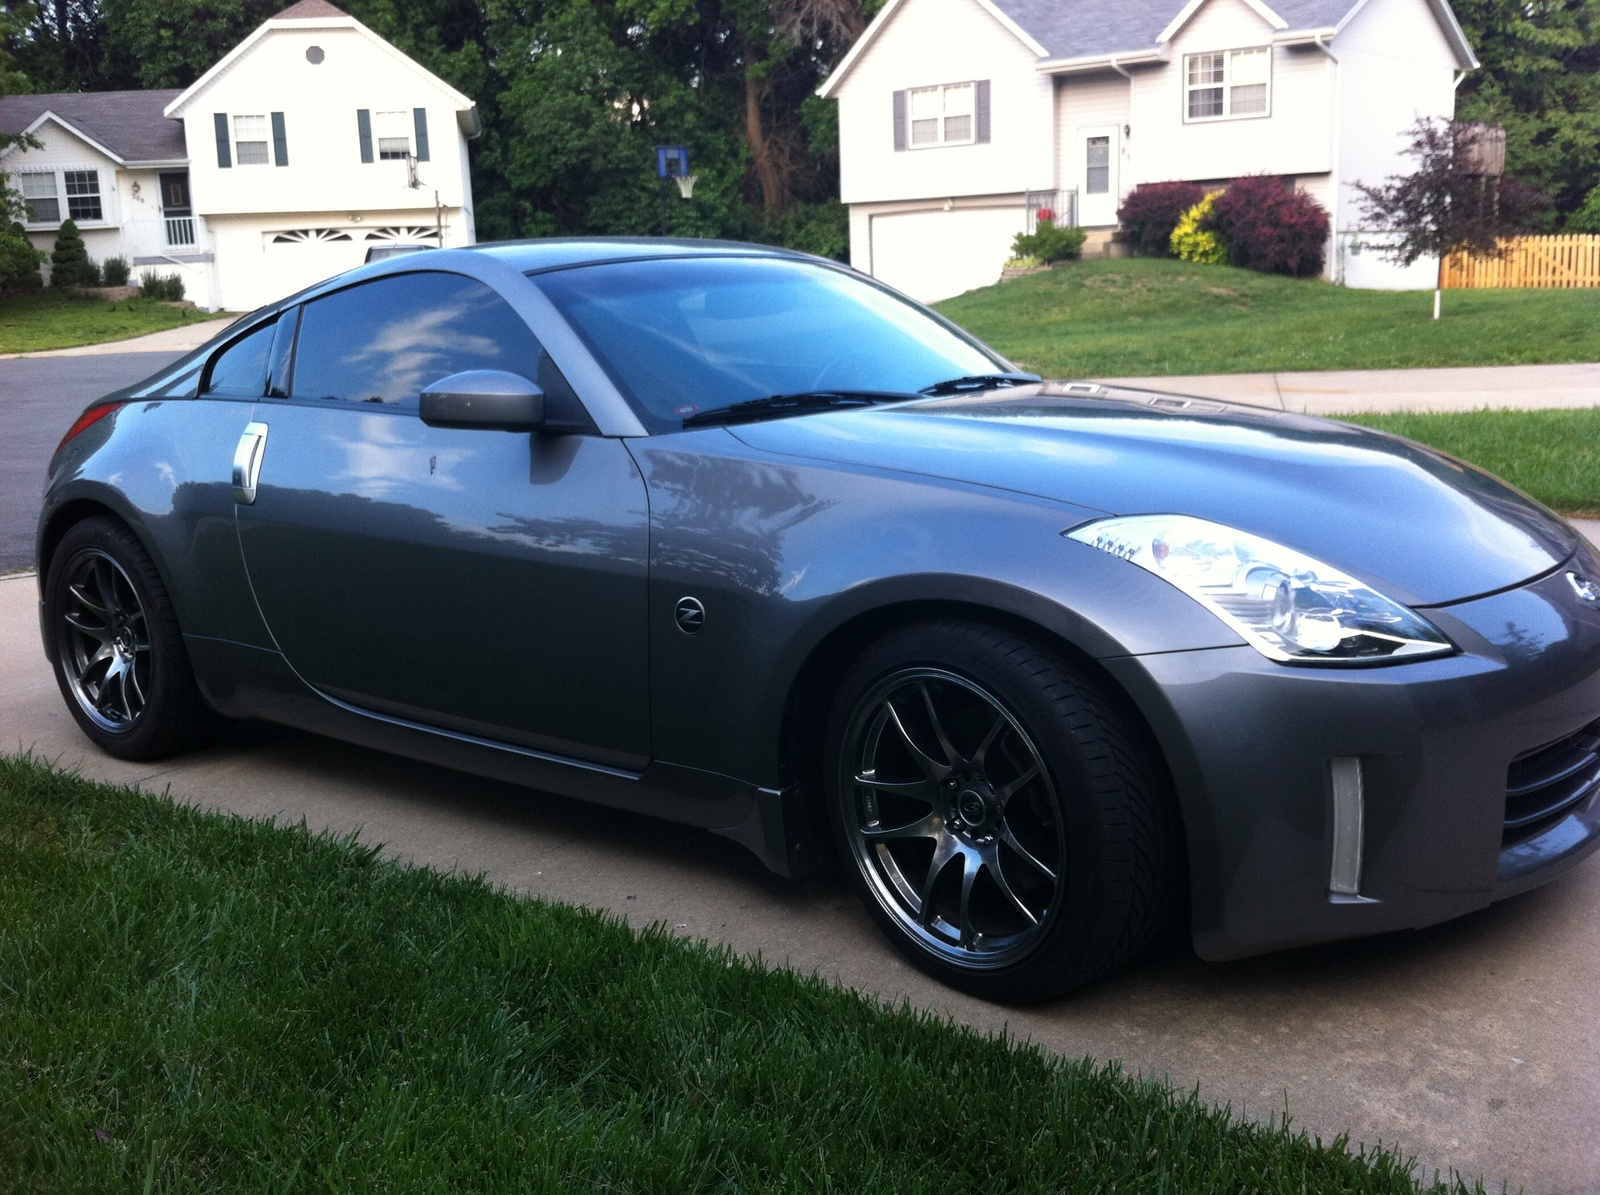 Reviews of 2007 nissan 350z #2